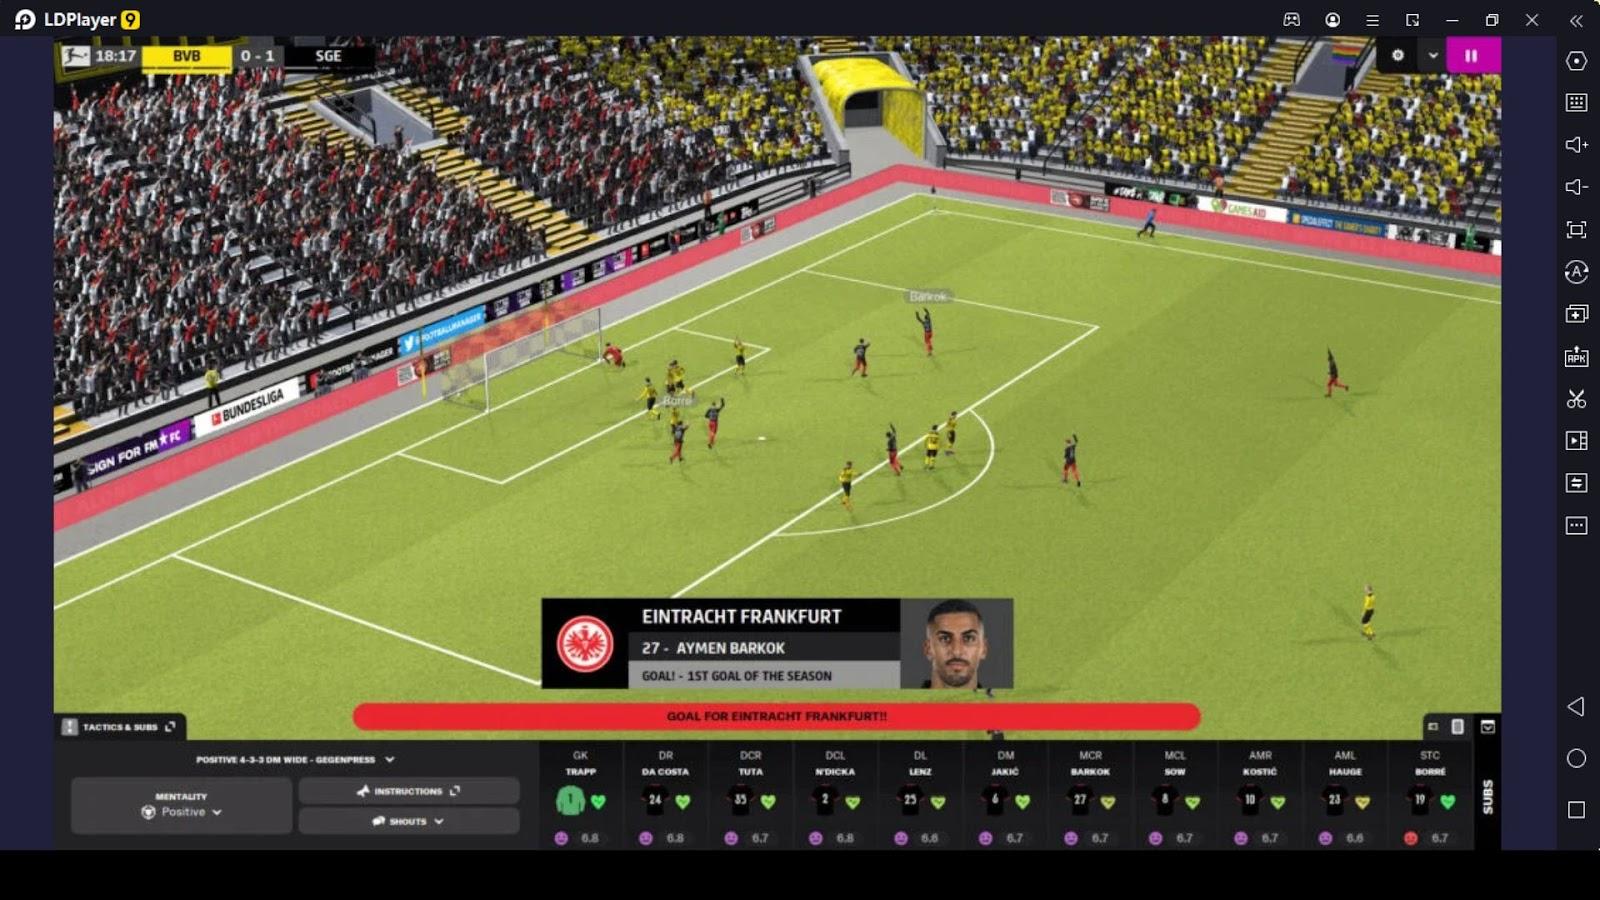 Football Manager 2022 Mobile Gameplay (Android, iOS) 